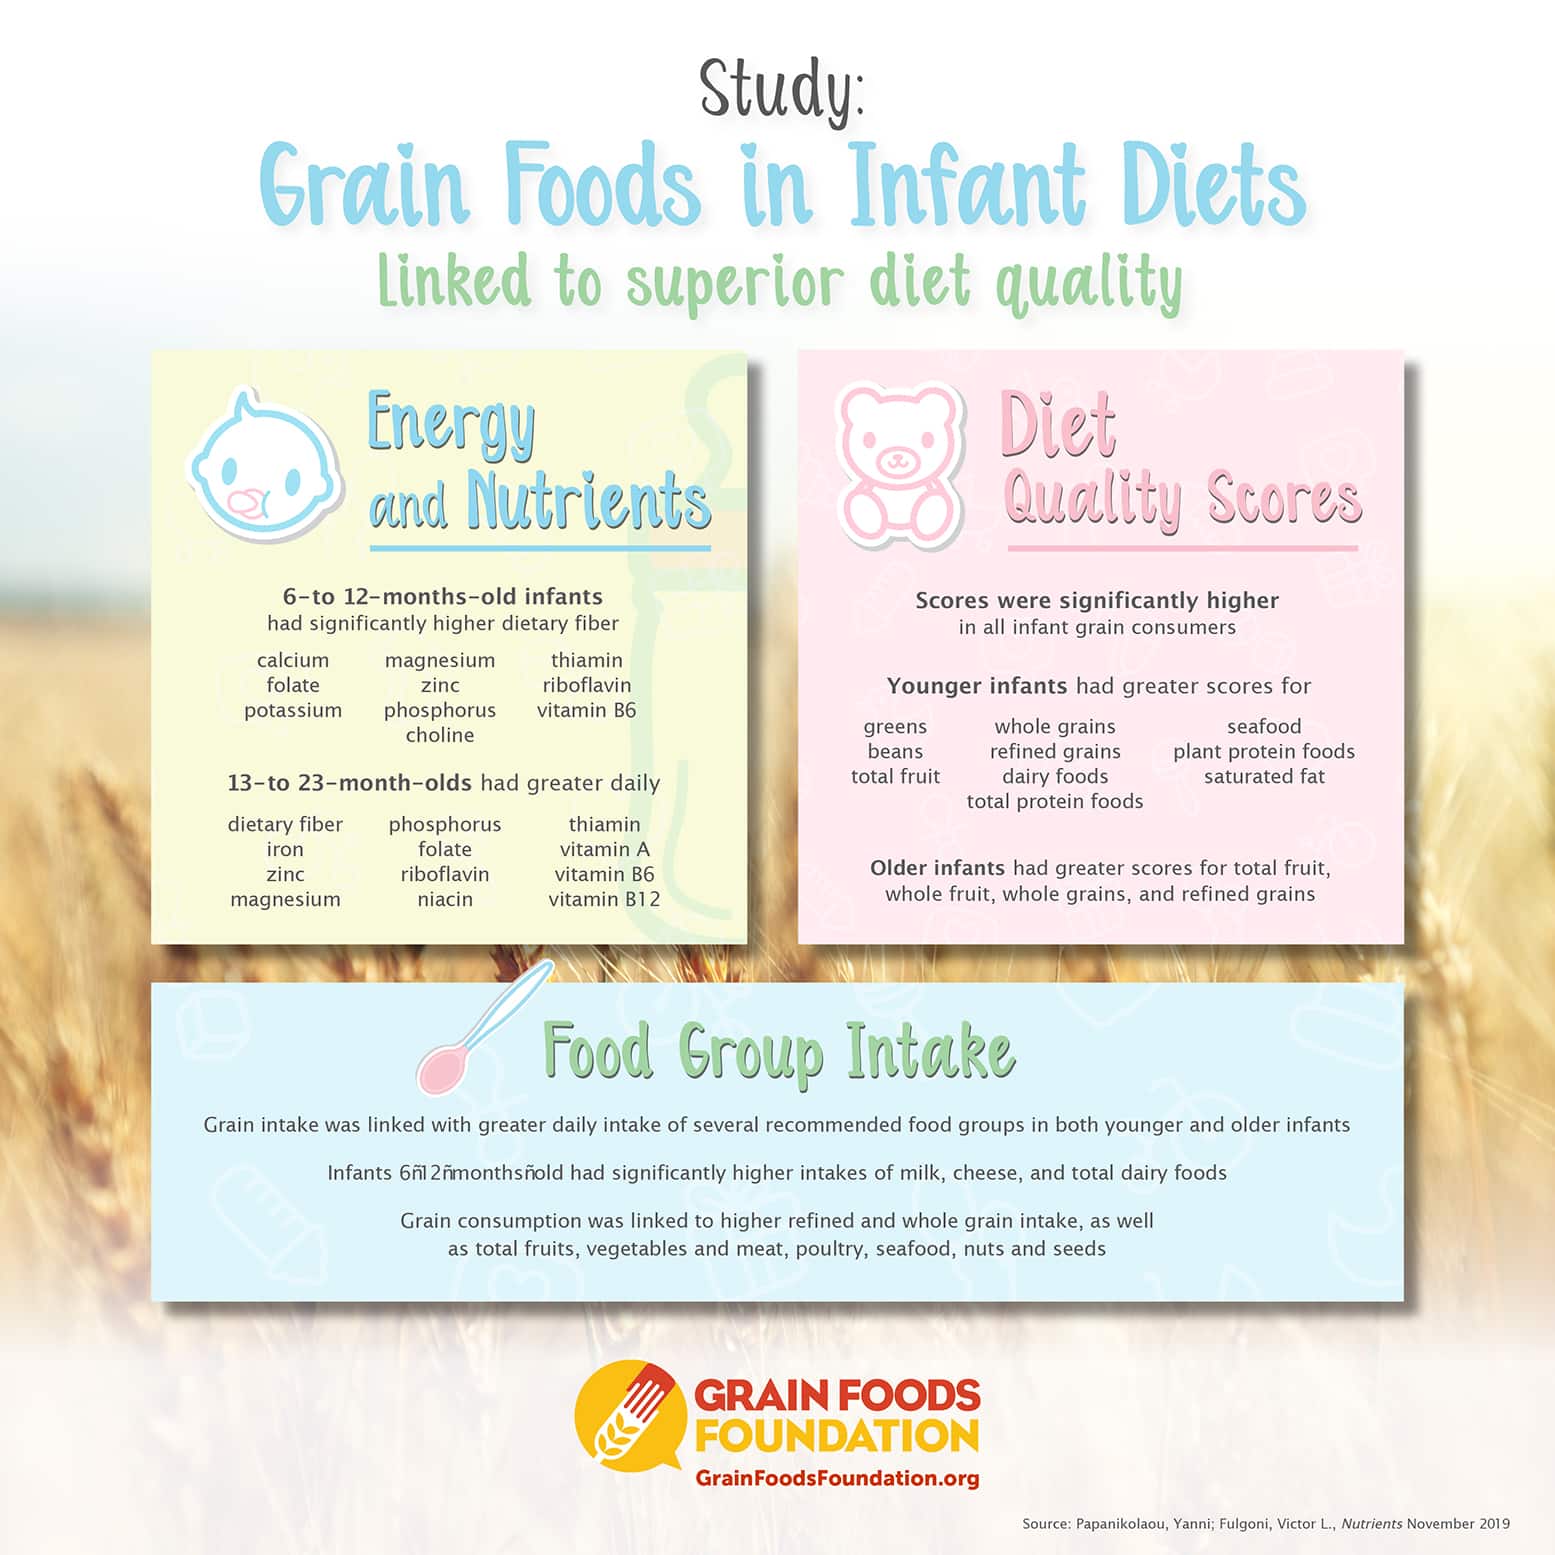 Grain Foods in Infant Diets Linked to Superior Diet Quality